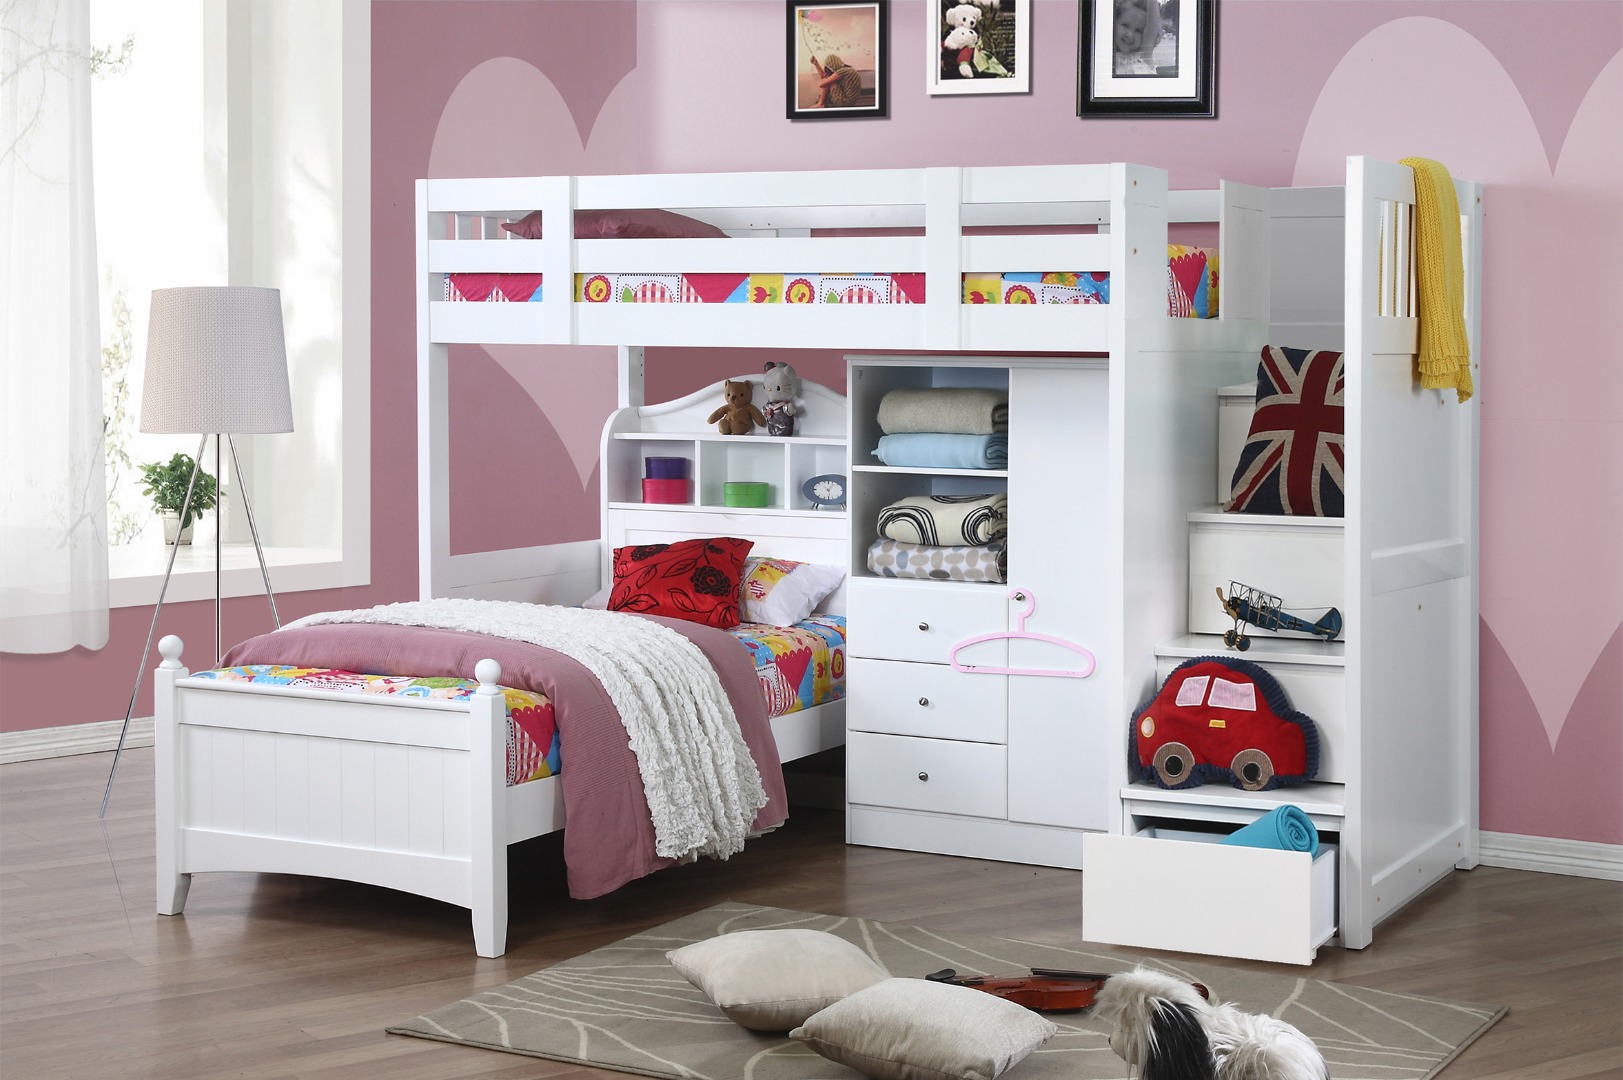 Invest in a Quality Kids Bed